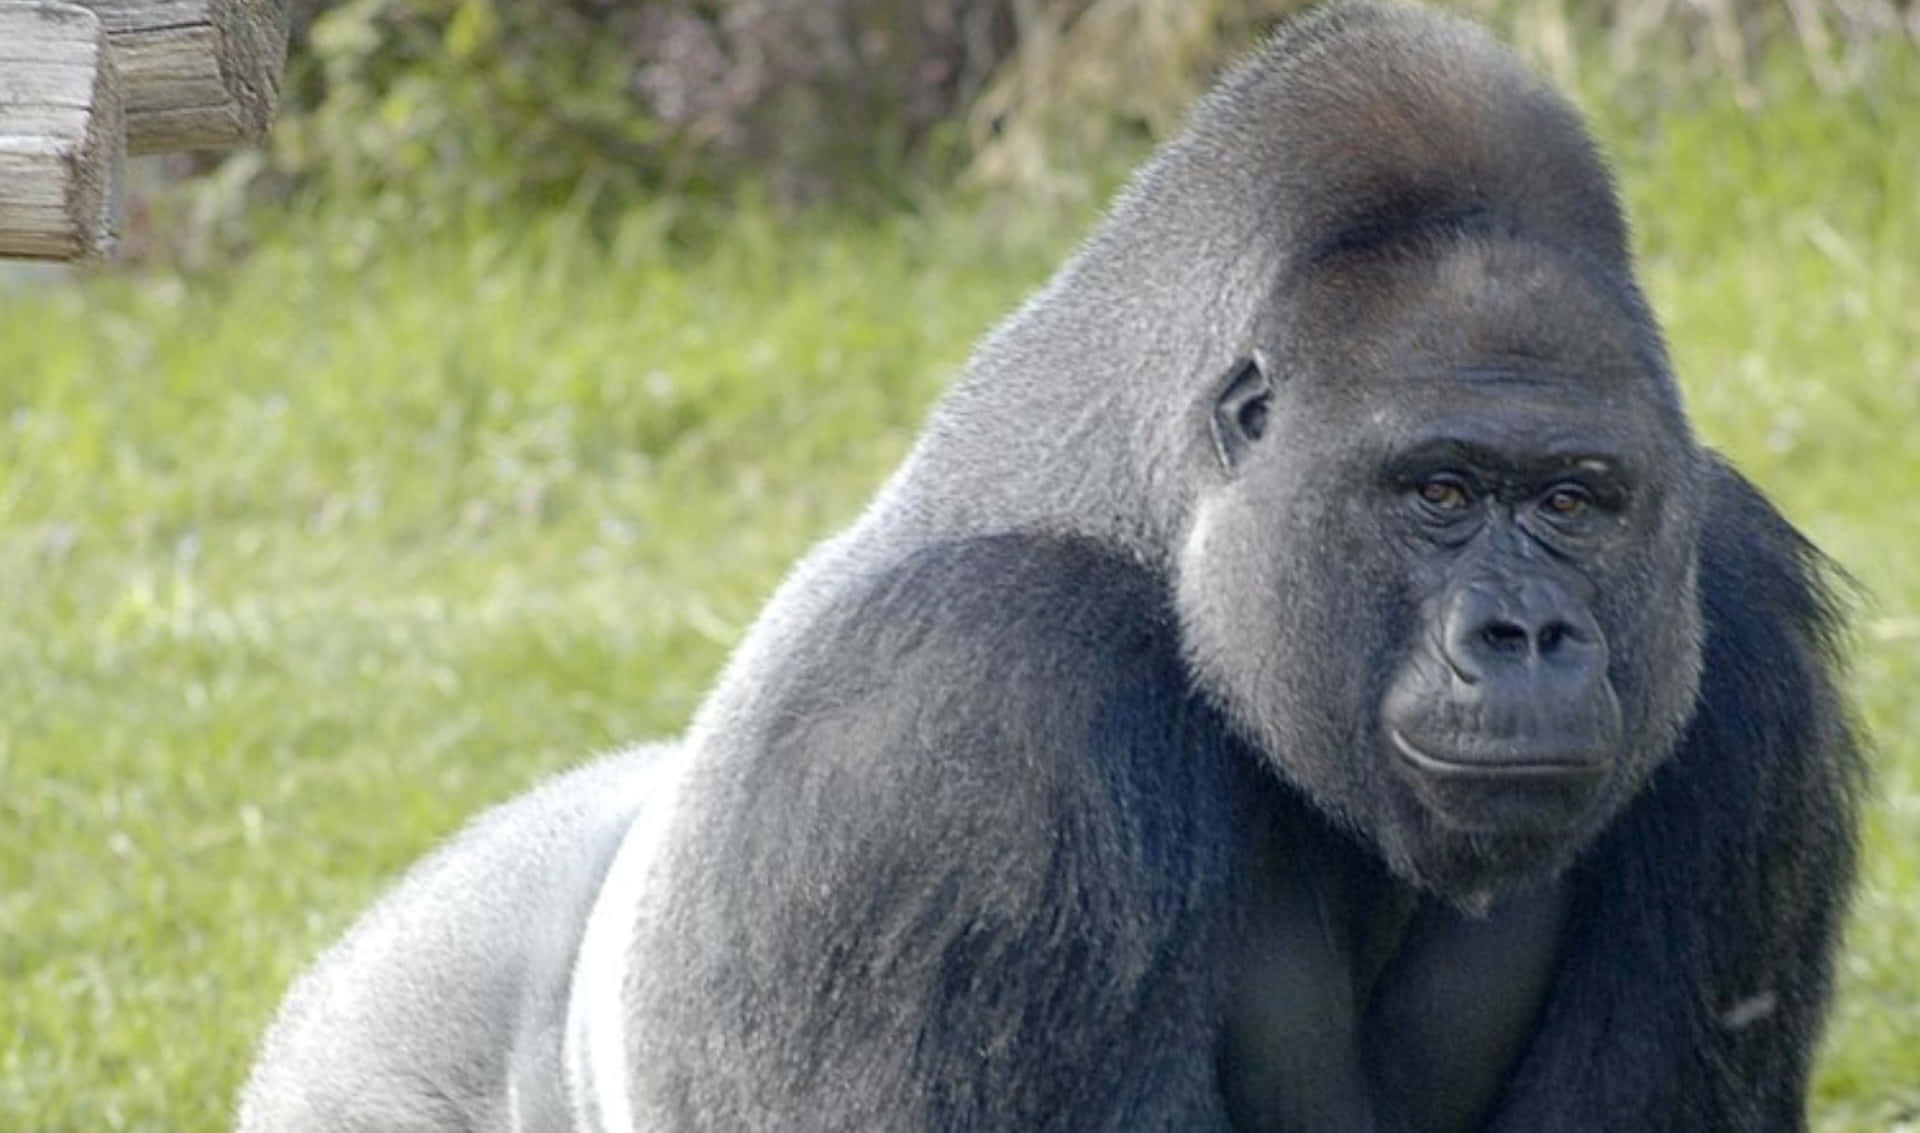 A powerful yet gentle mountain gorilla in its natural habitat